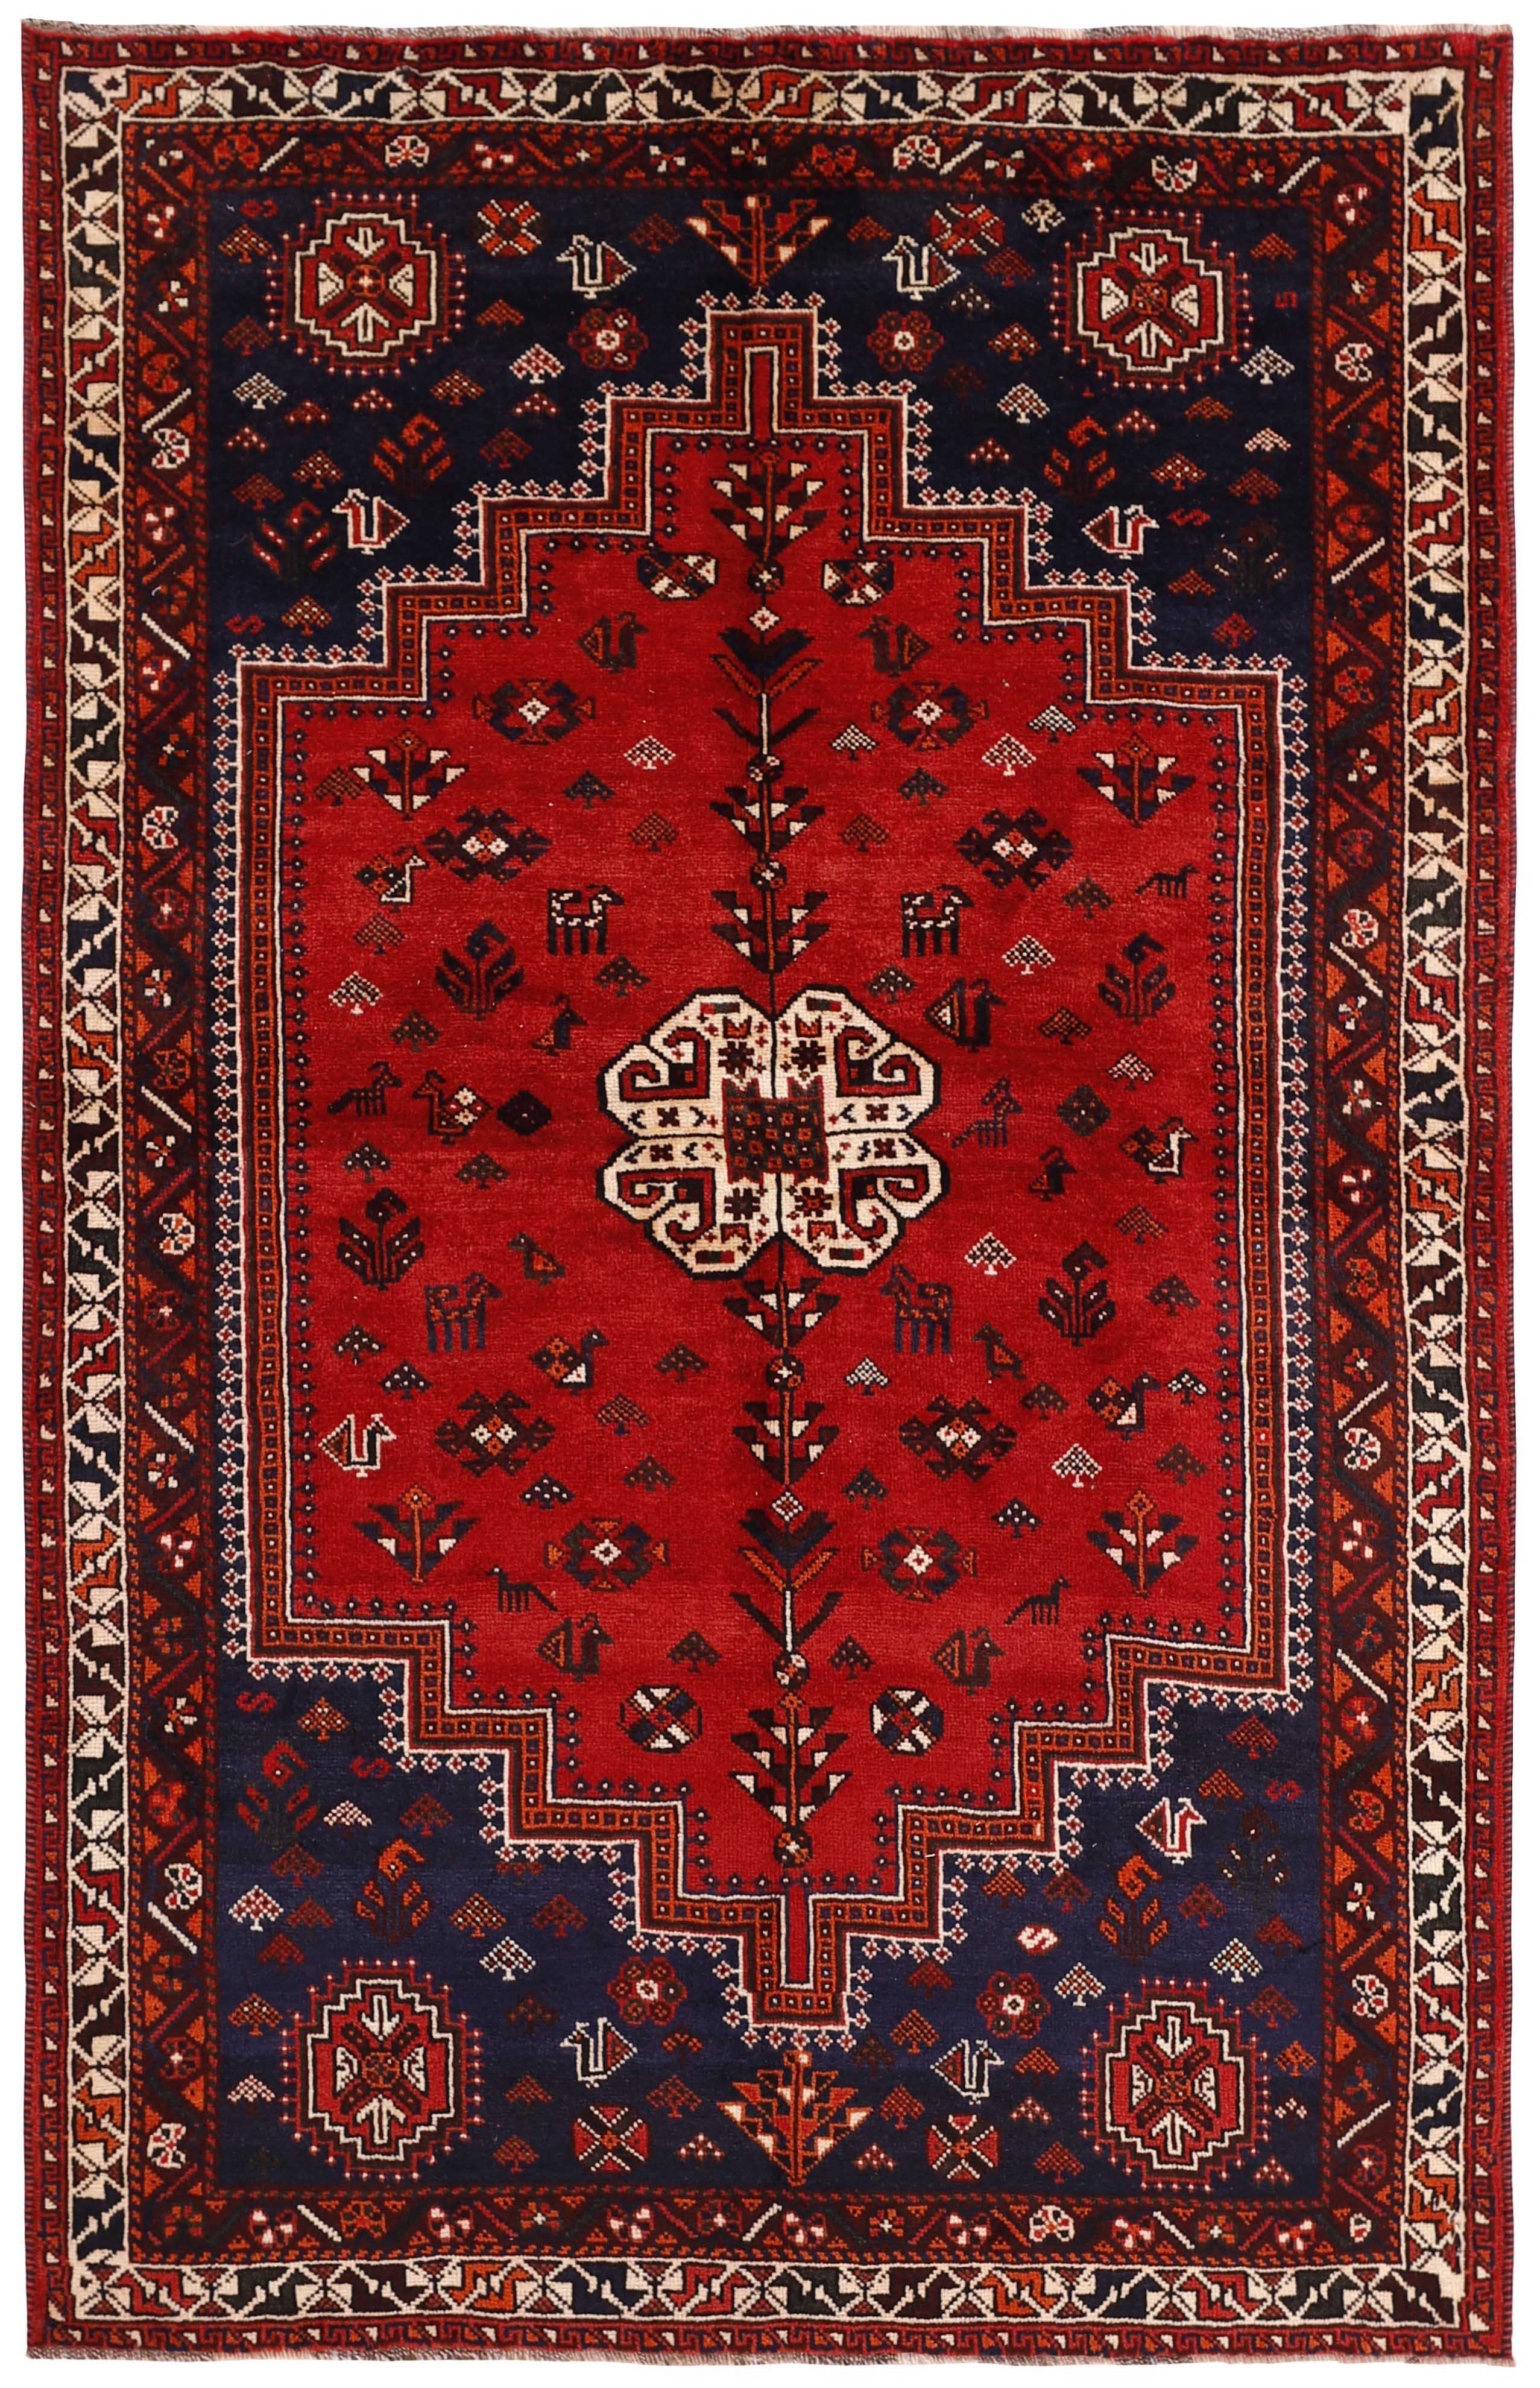 Authentic persian rug with a traditional tribal geometric pattern in red and black